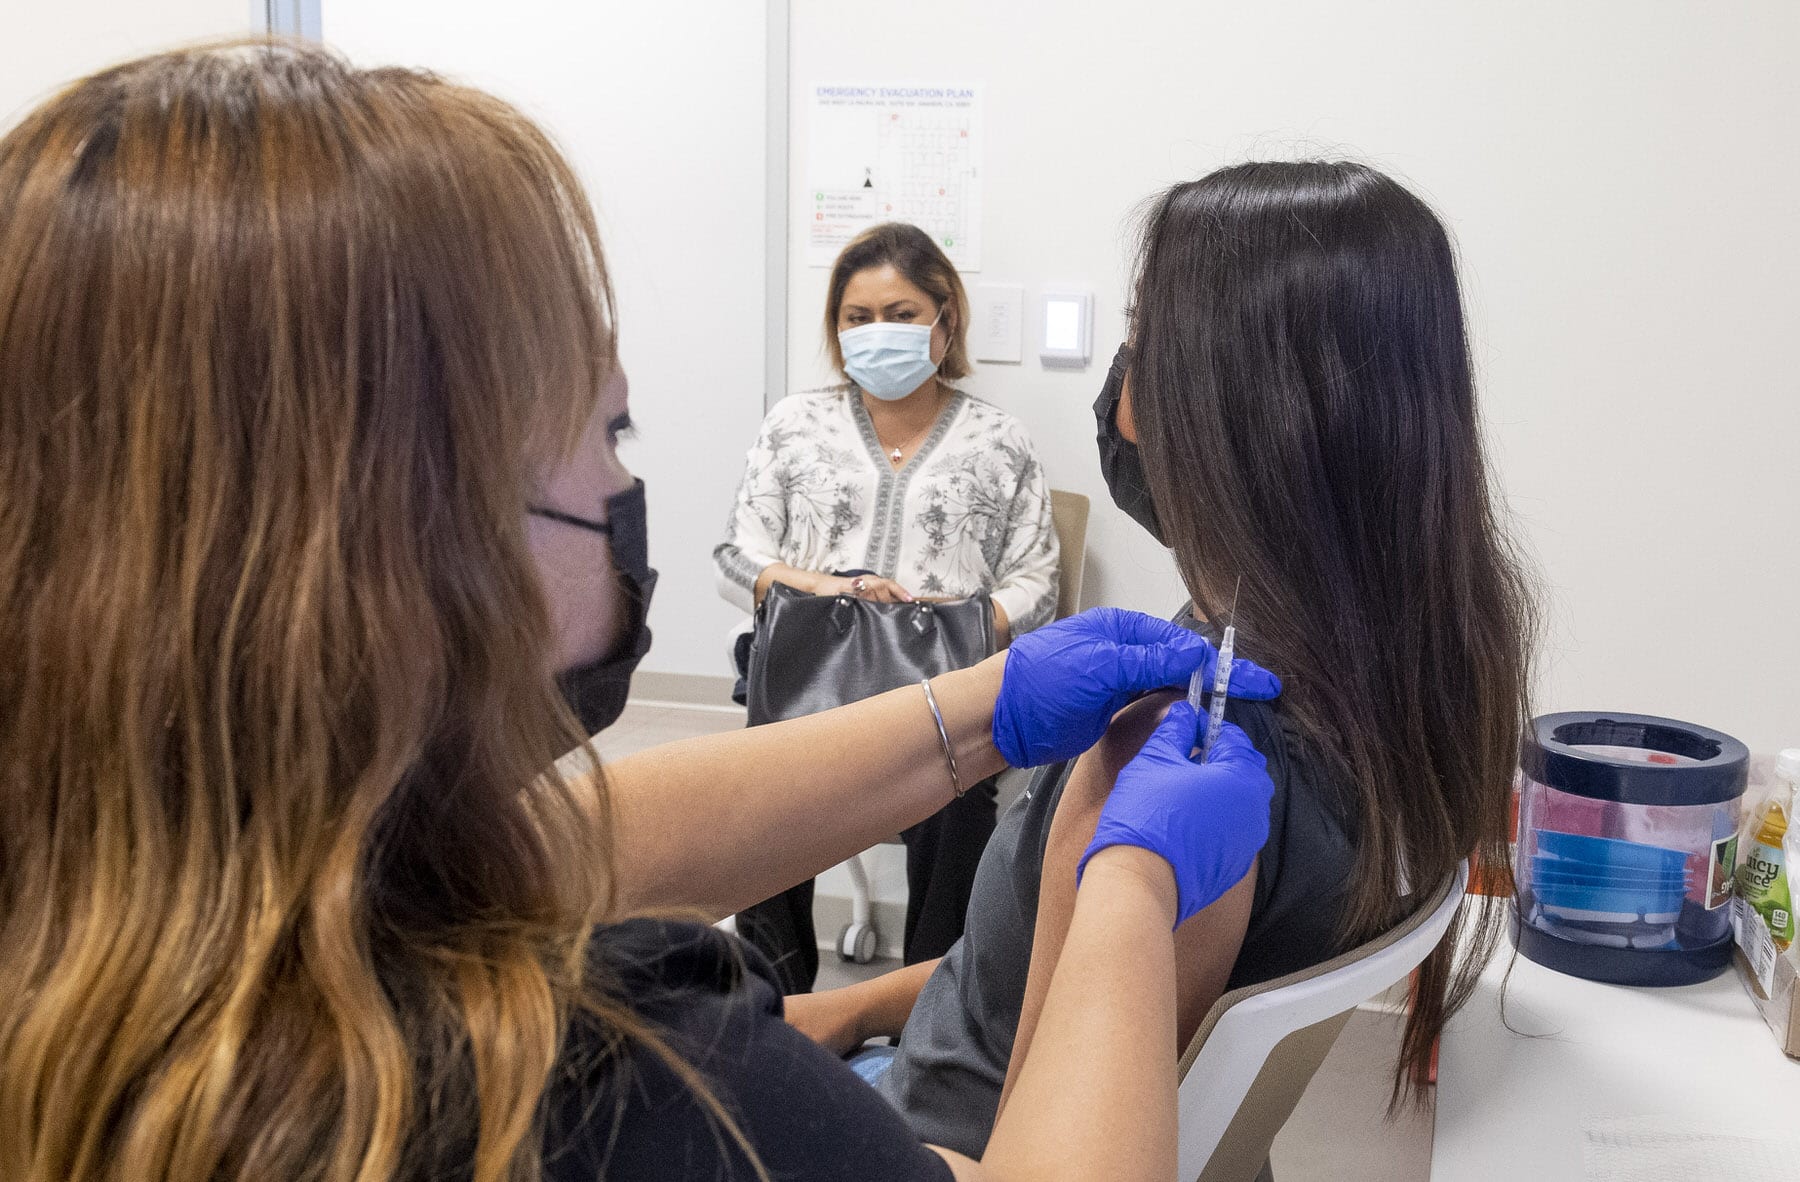 APRIL 28: A 16-year-old gets a Pfizer-BioNTech COVID-19 vaccine from Marie Thai, RN at UCI Health Family Health Center in Anaheim, CA on Wednesday, April 28, 2021 as her mom watches.